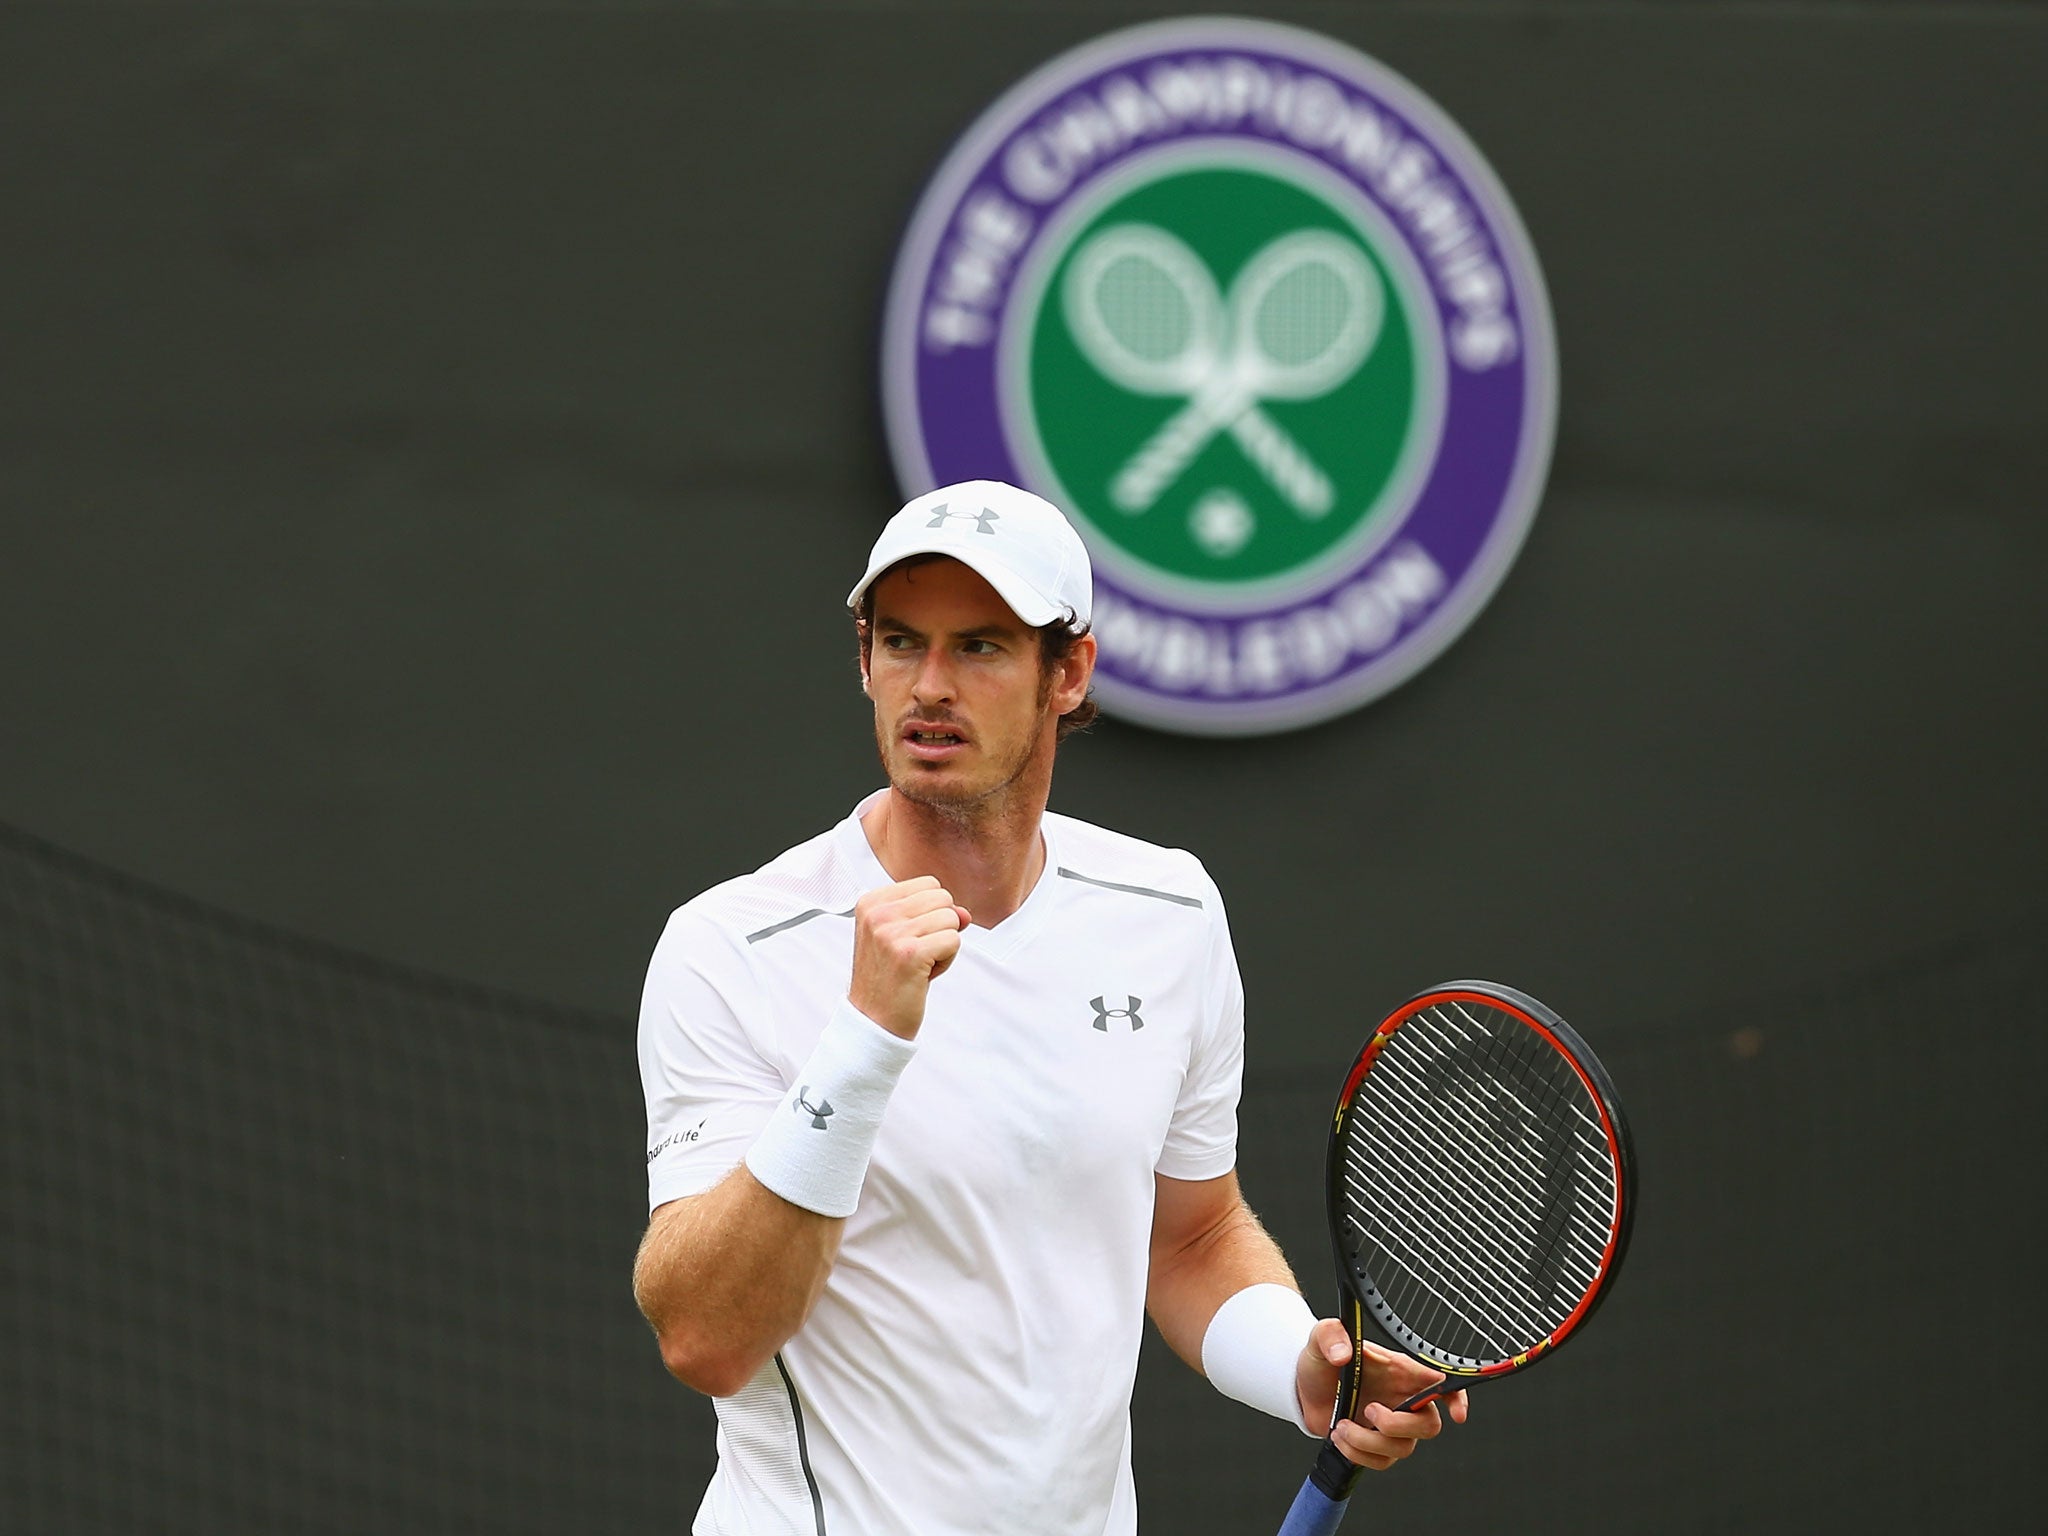 Andy Murray takes on Andreas Seppi